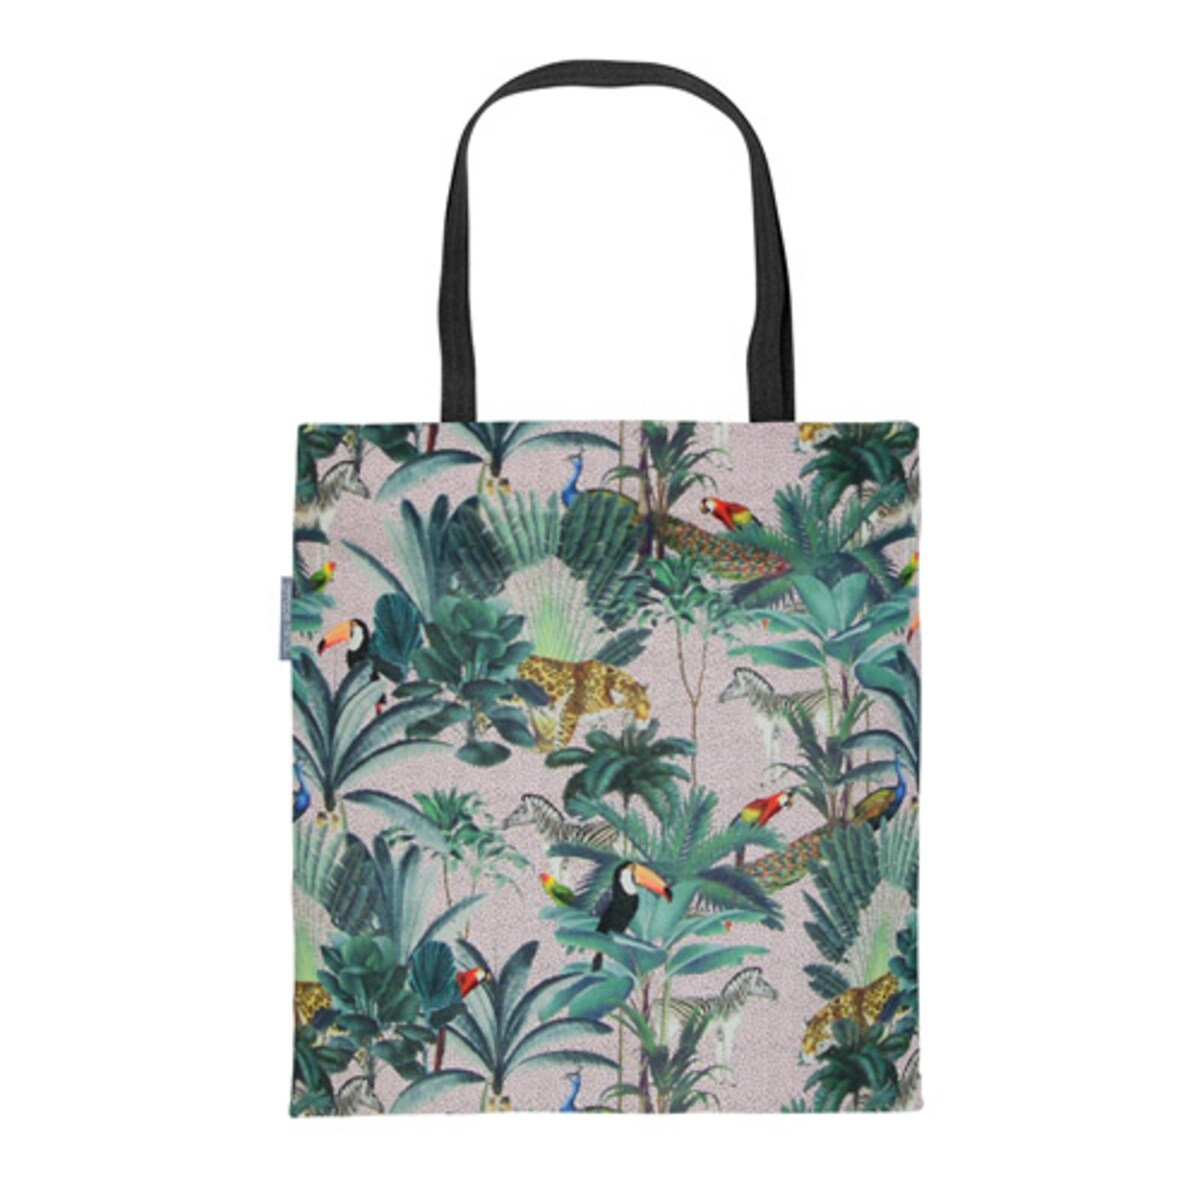 Annabel Trends Fabric Shopping Tote Jungle Spot